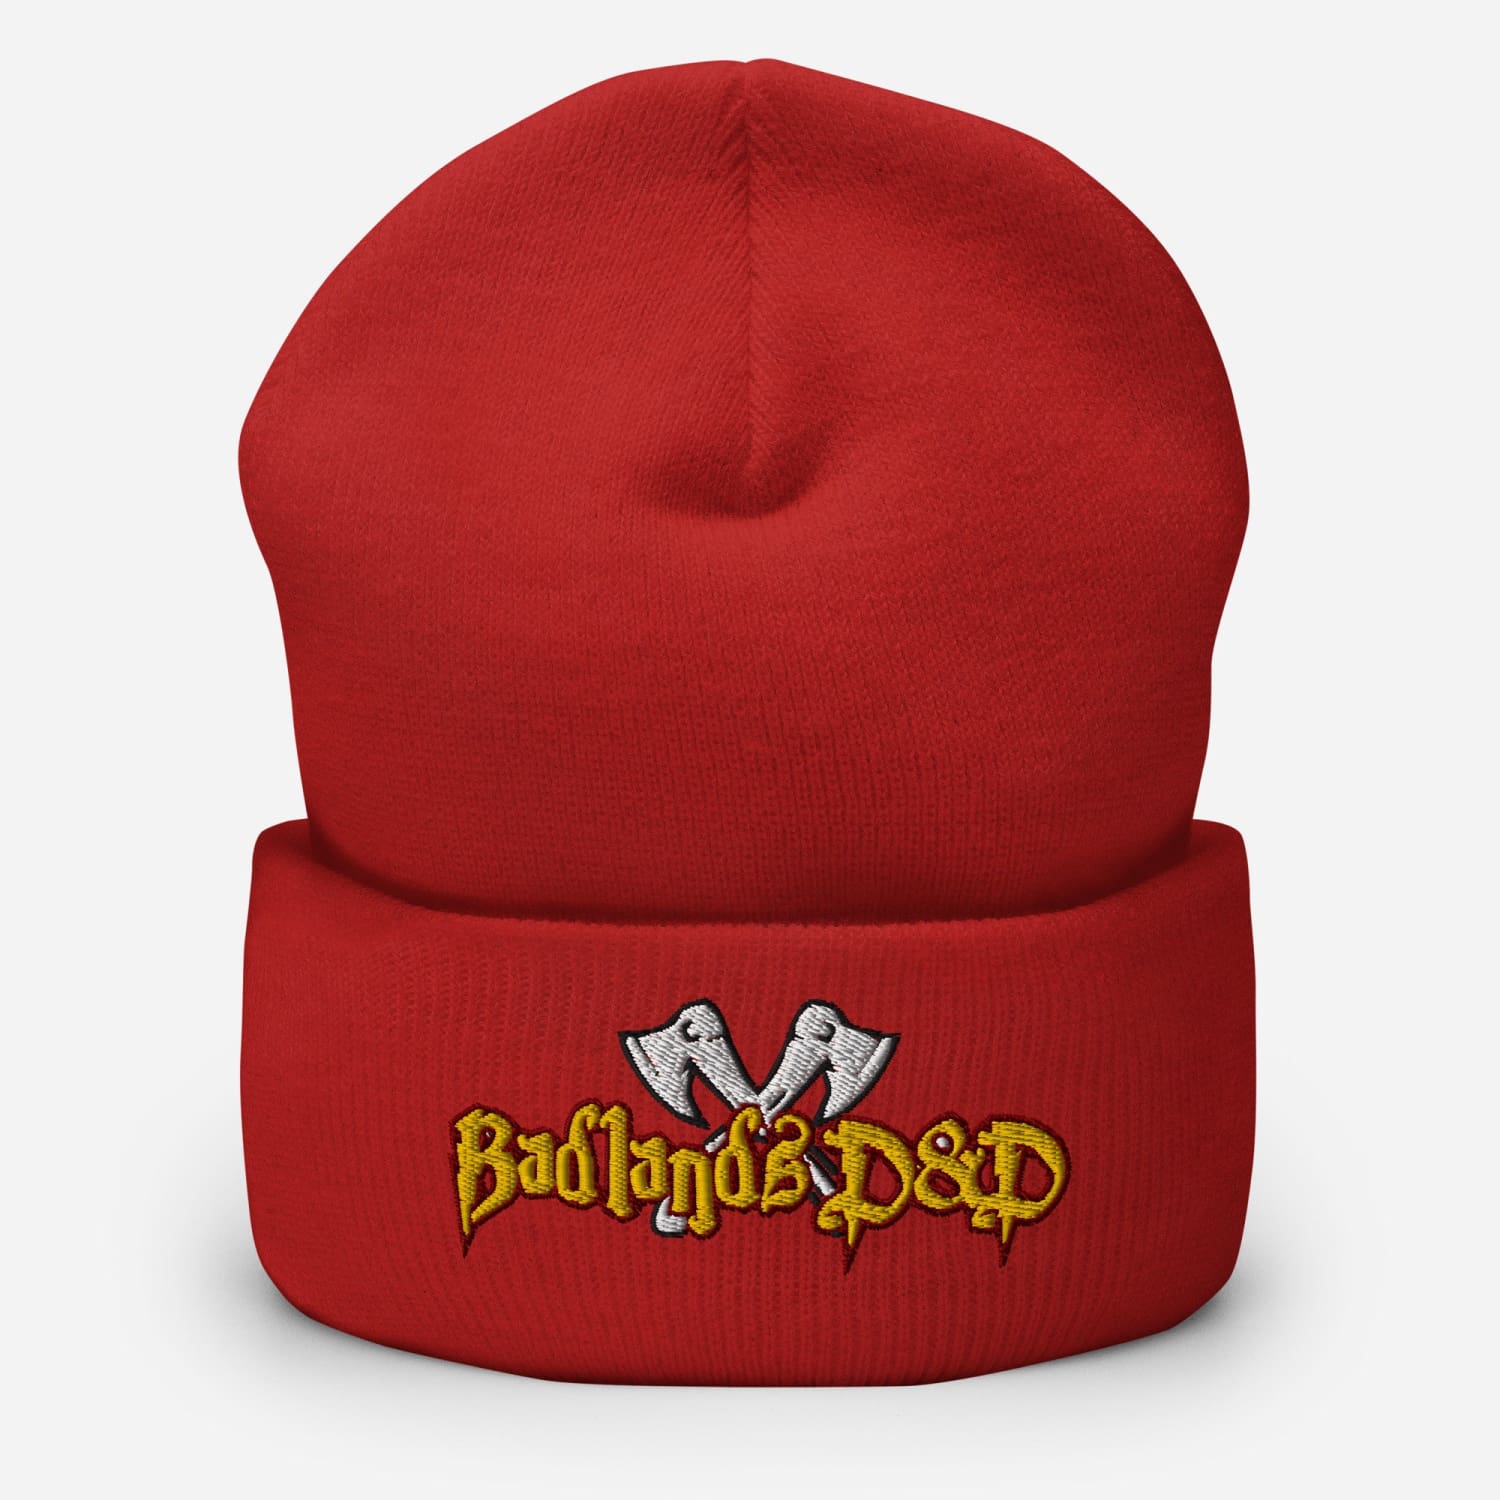 Badlands D&D Logo Cuffed Knit Beanie / Tuque - Red